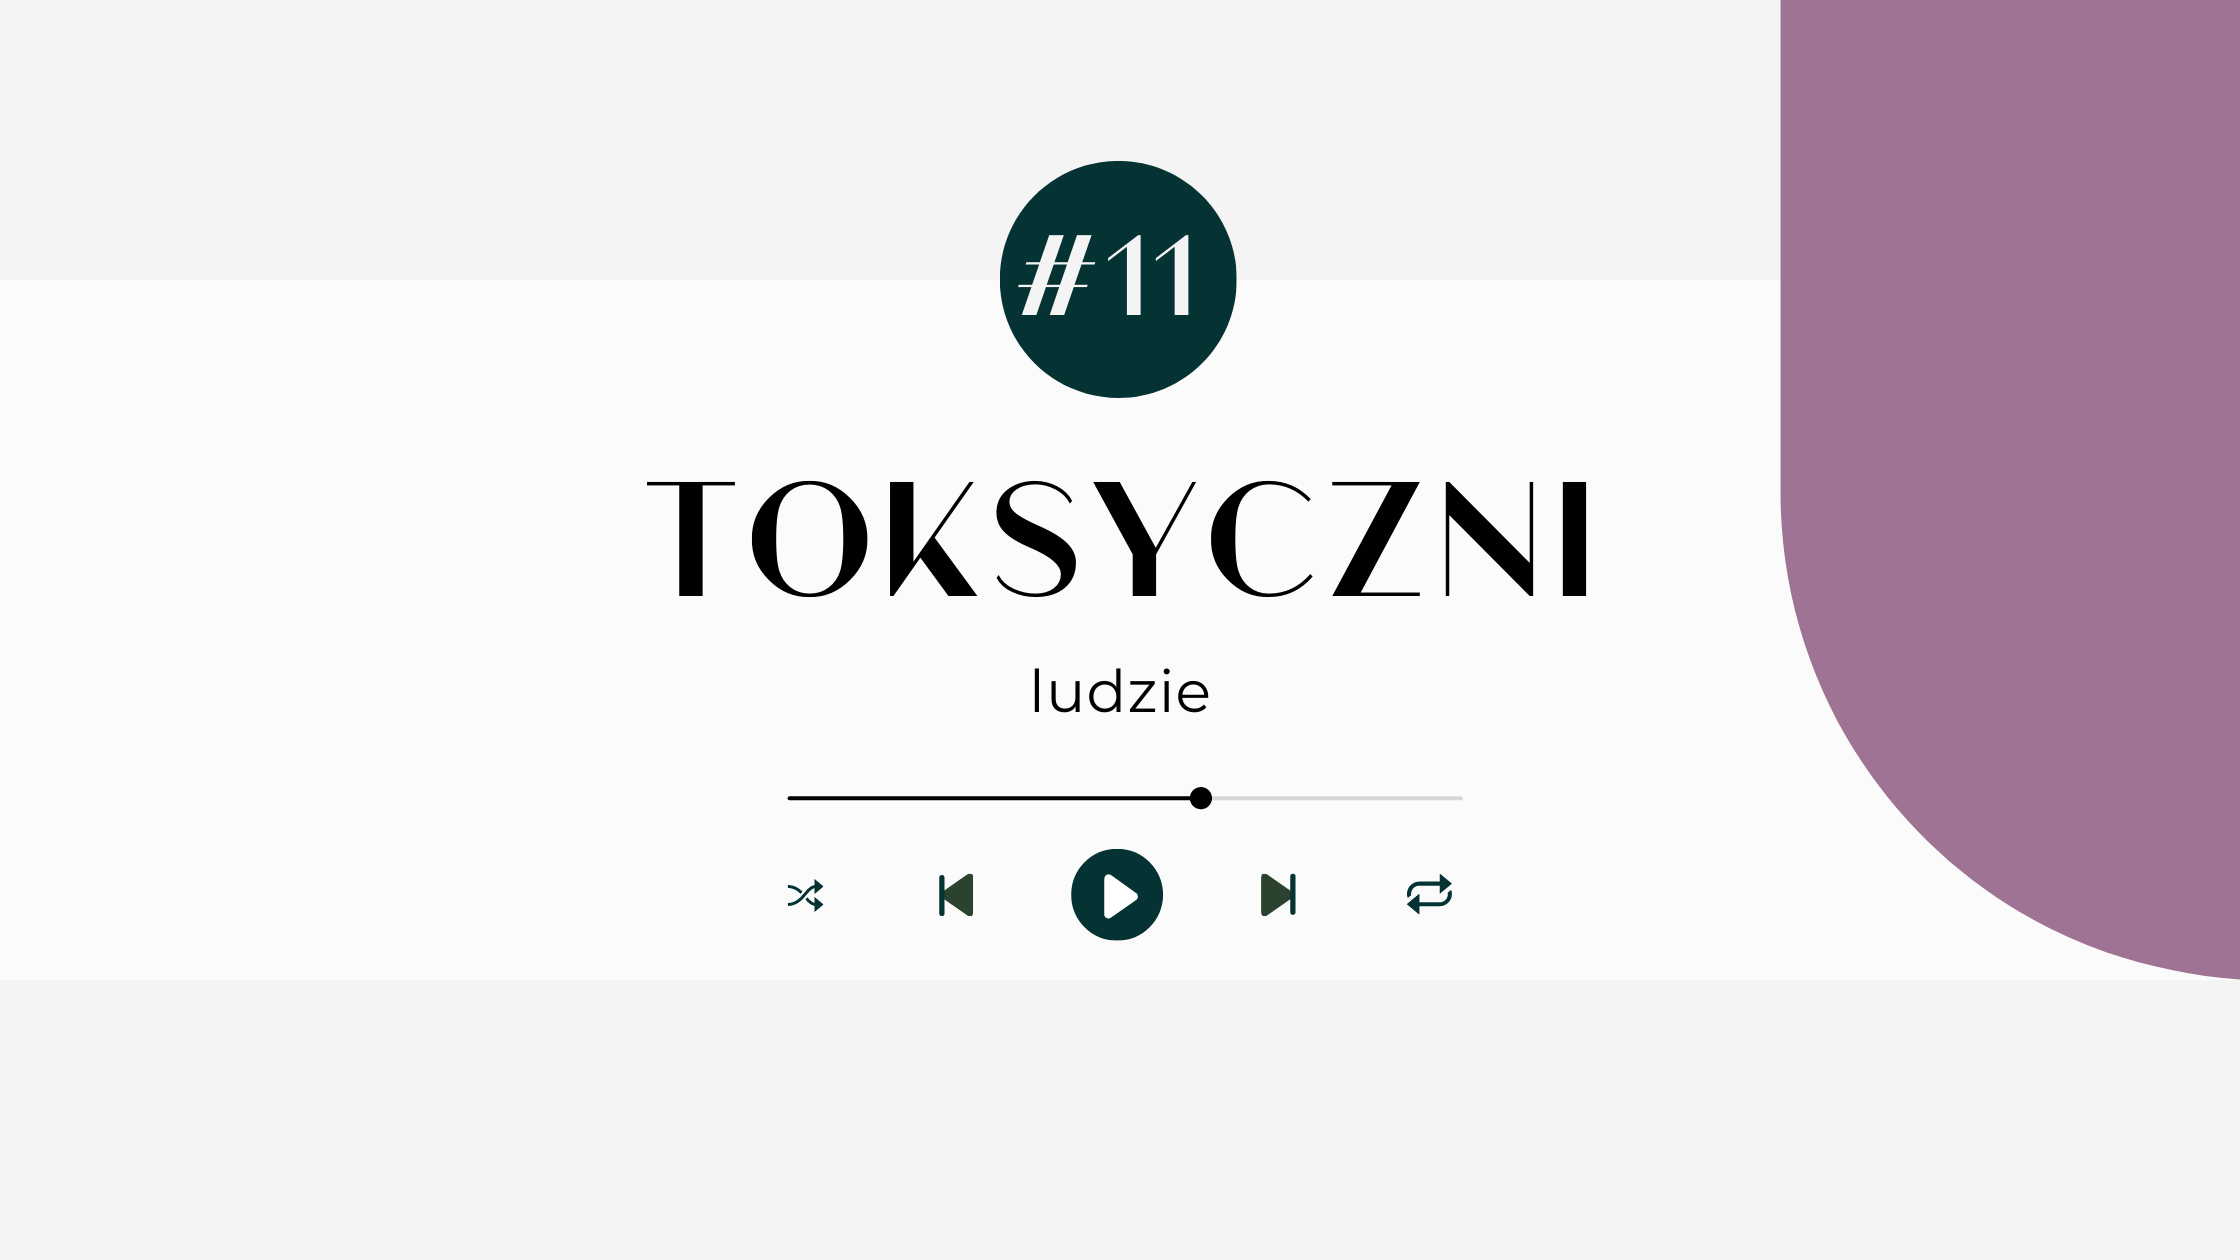 You are currently viewing # 11 TOKSYCZNI LUDZIE